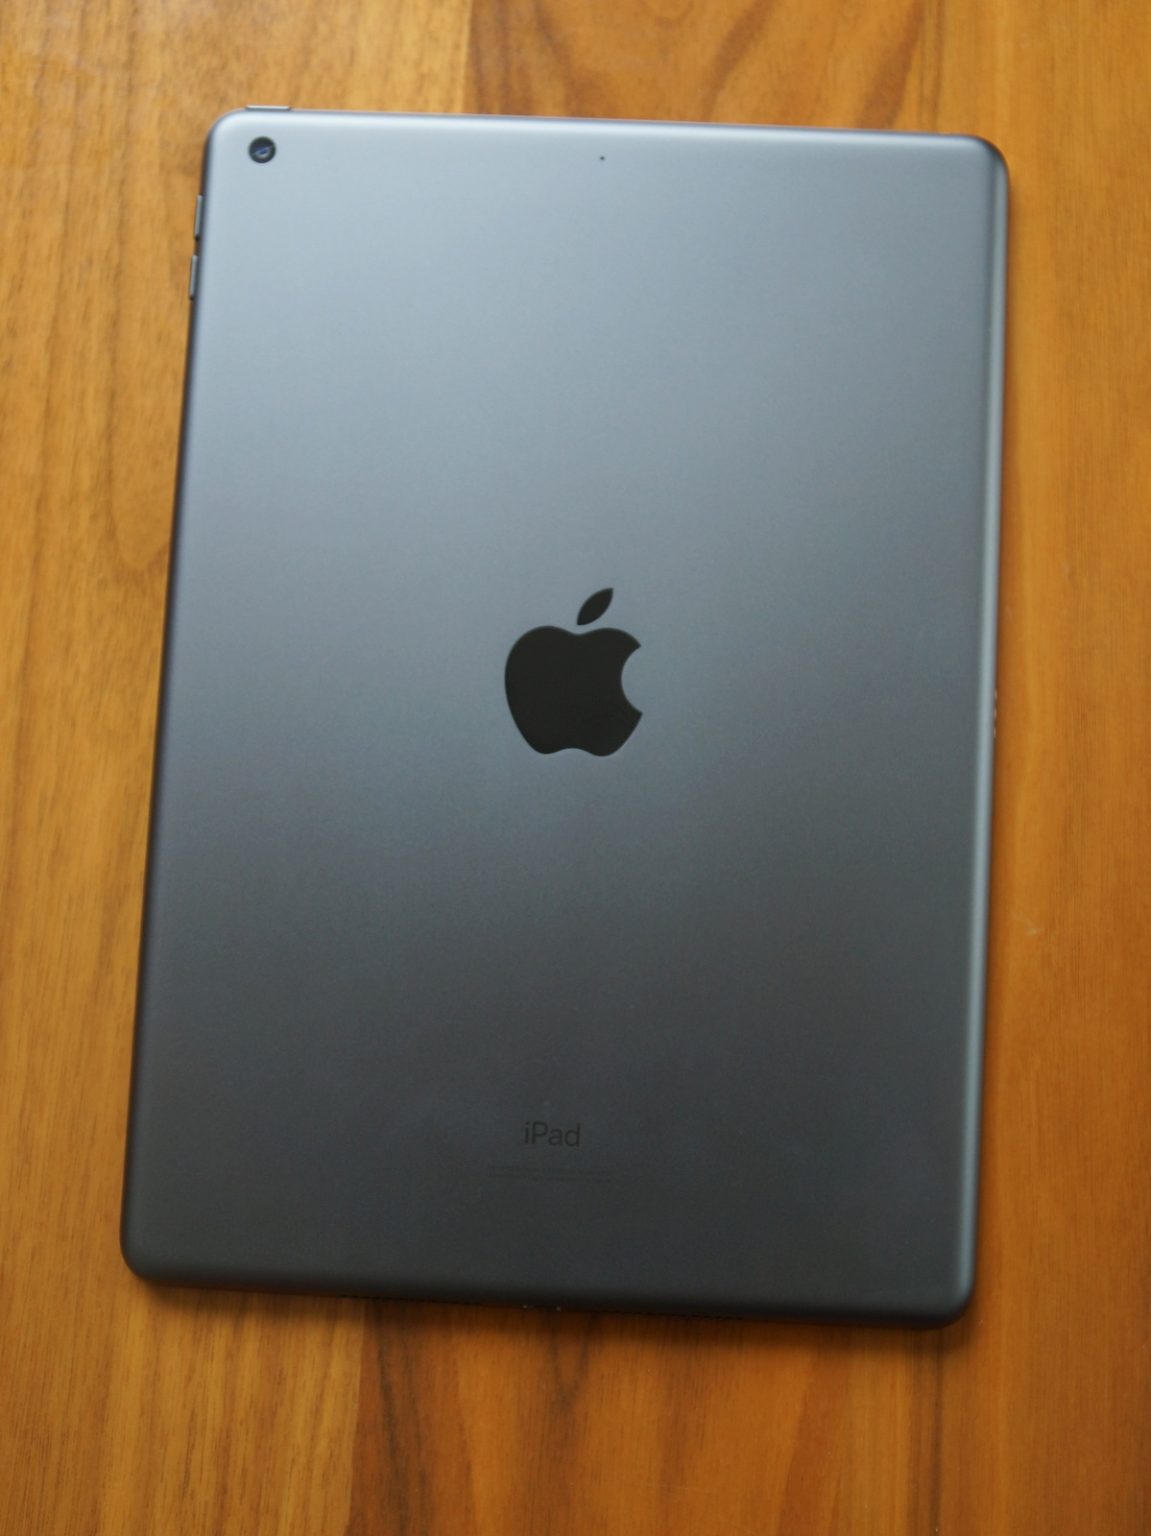 Apple iPad 10.2 inch 8th Gen 32GB Wi-Fi (As New) New Battery, Case, Screen Protector & Shipping